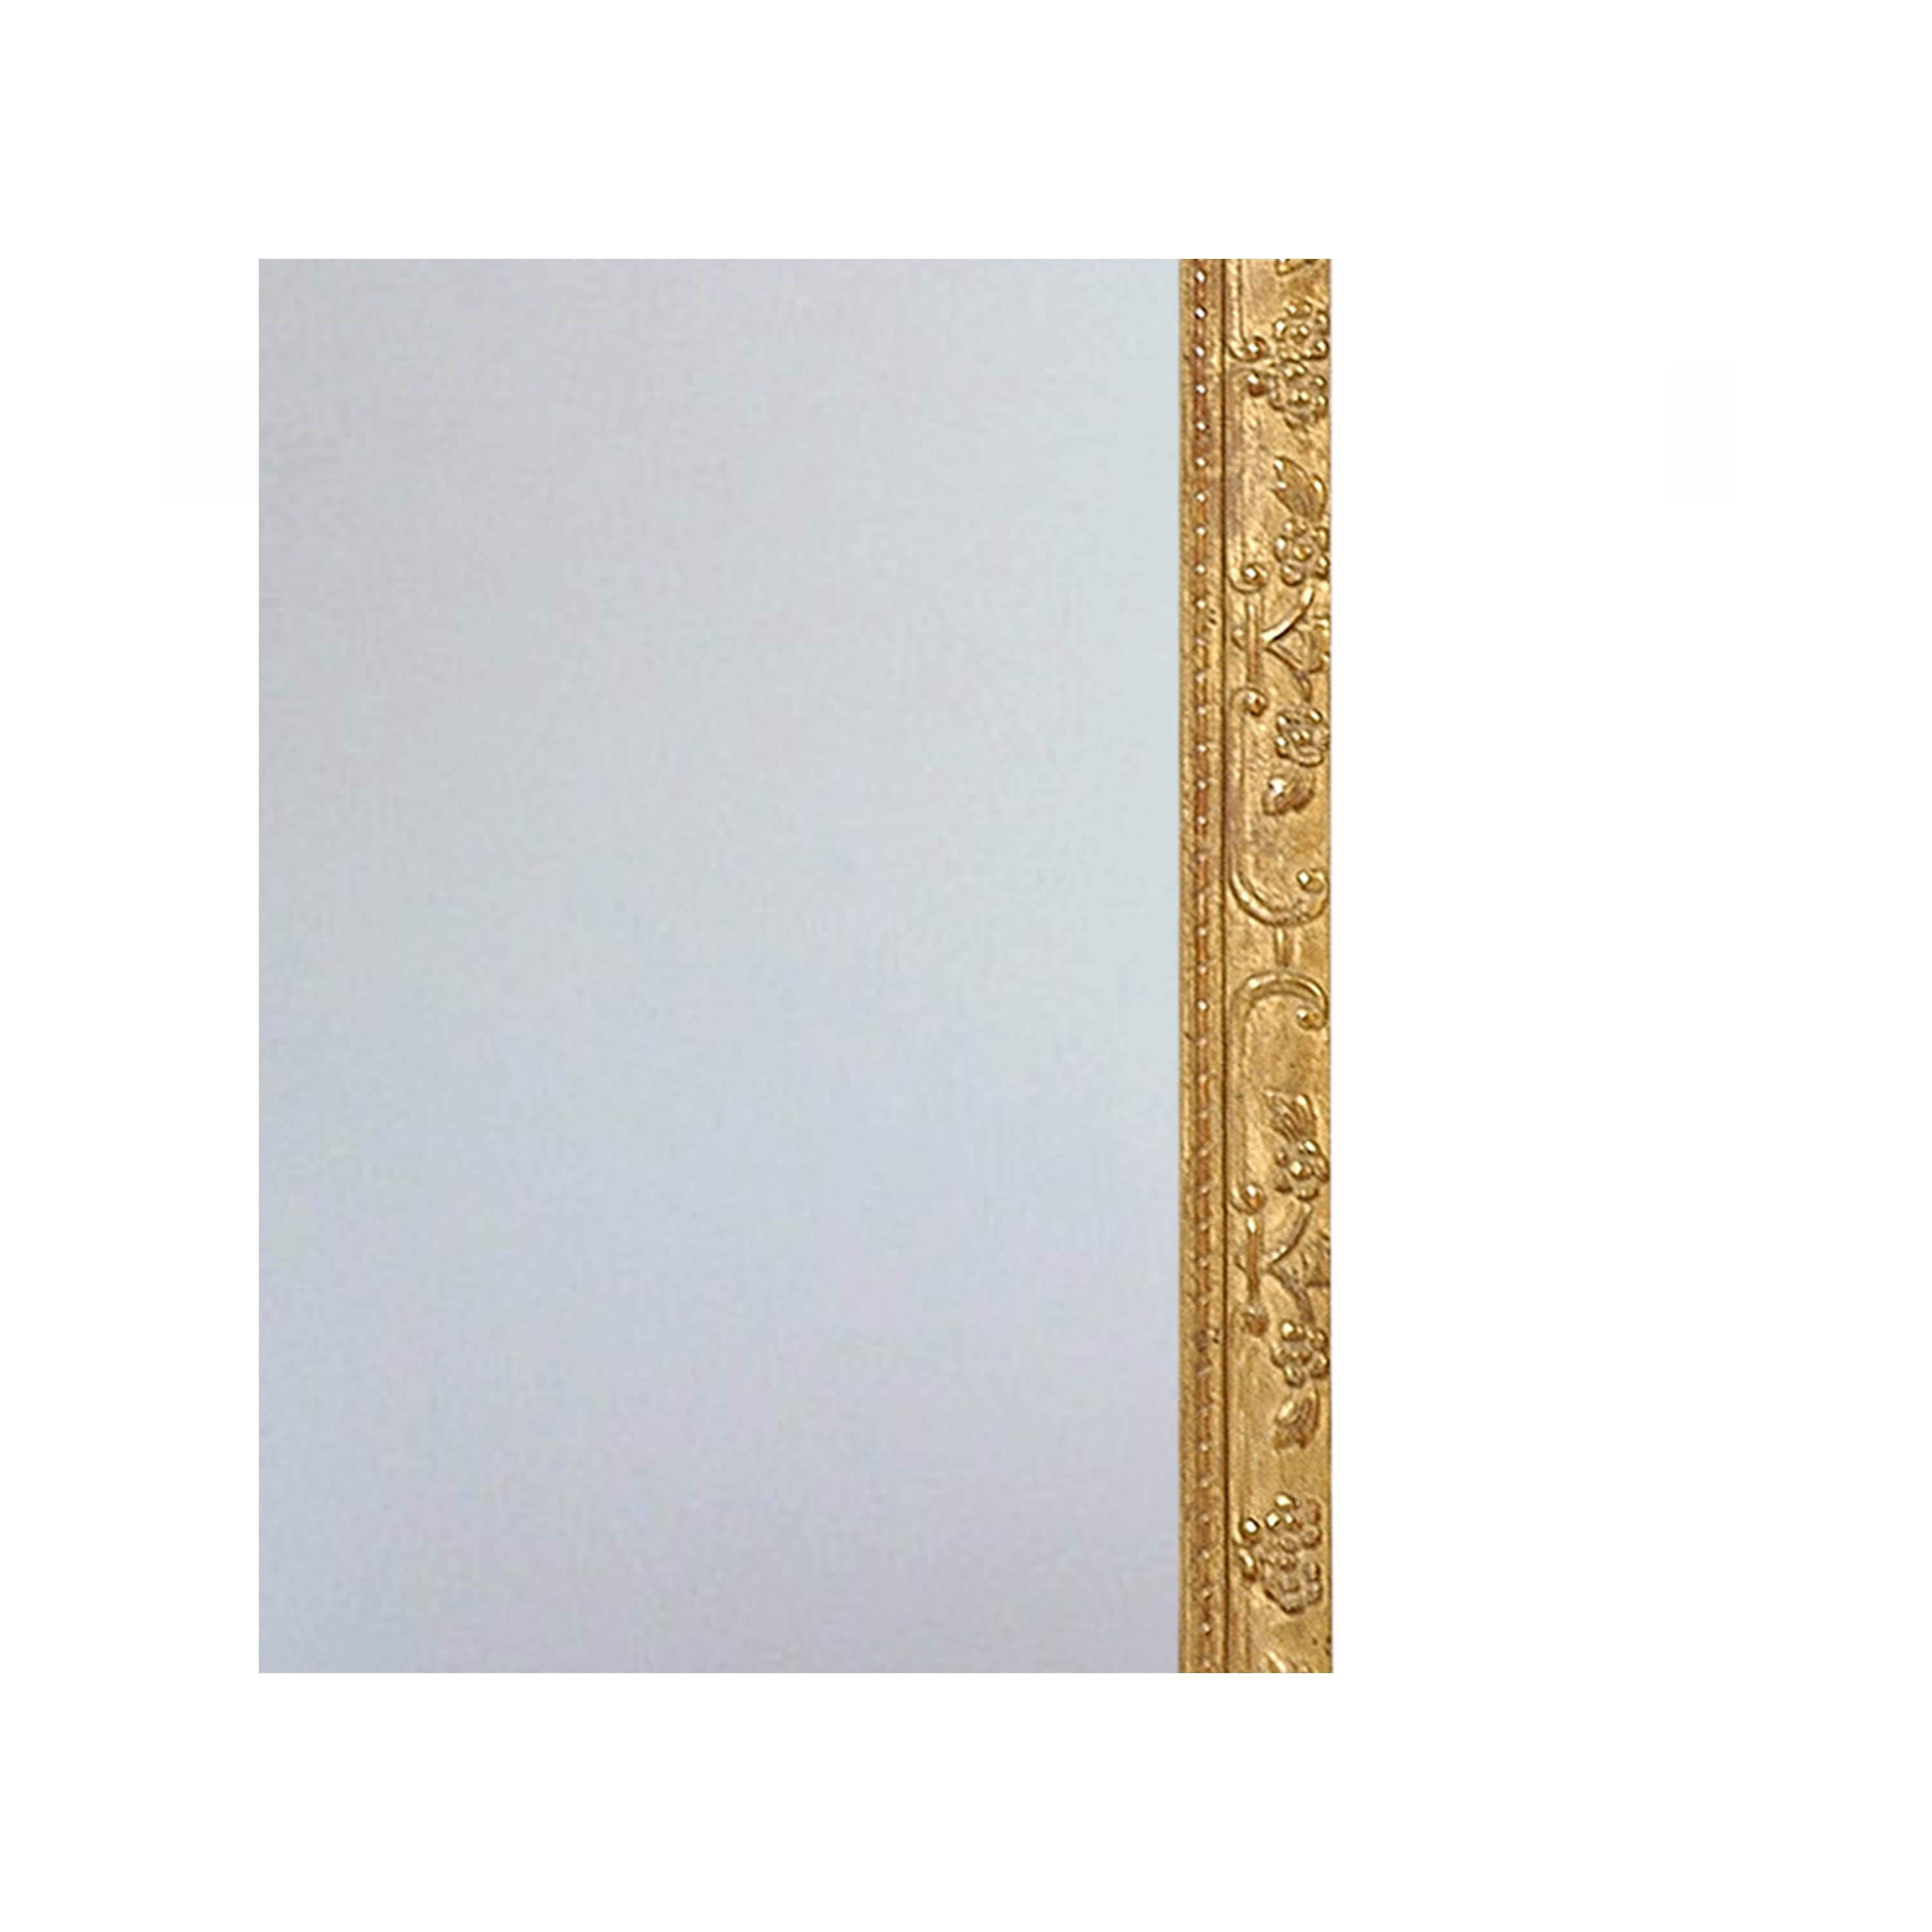 Spanish Neoclassical Rectangular Gold Foil Hand Carved Wooden Mirror, 1970 For Sale